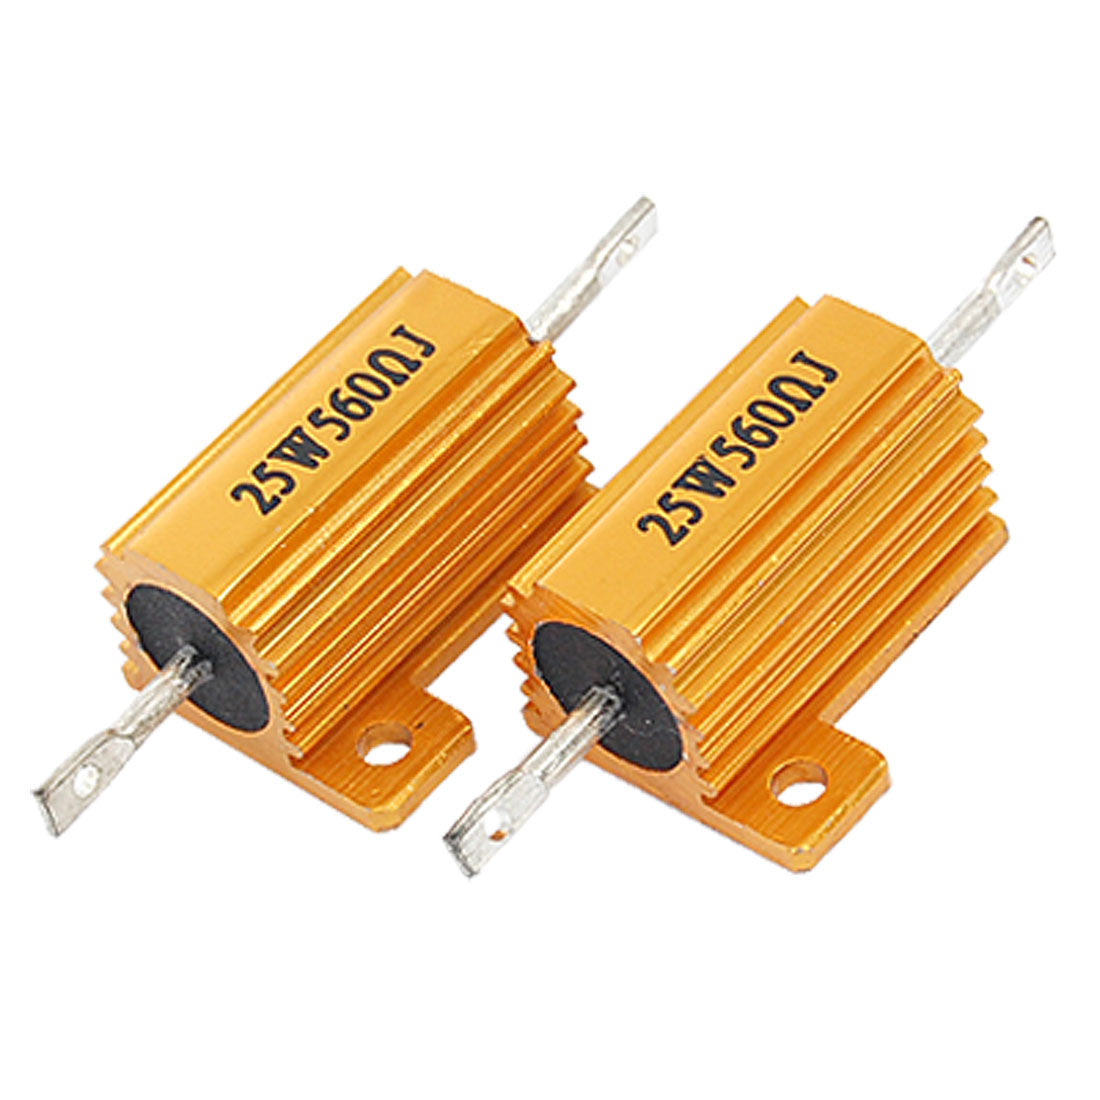 uxcell Uxcell 2 Pcs Chassis Mounted 25W 560 Ohm 5% Aluminum Case Wirewound Resistors